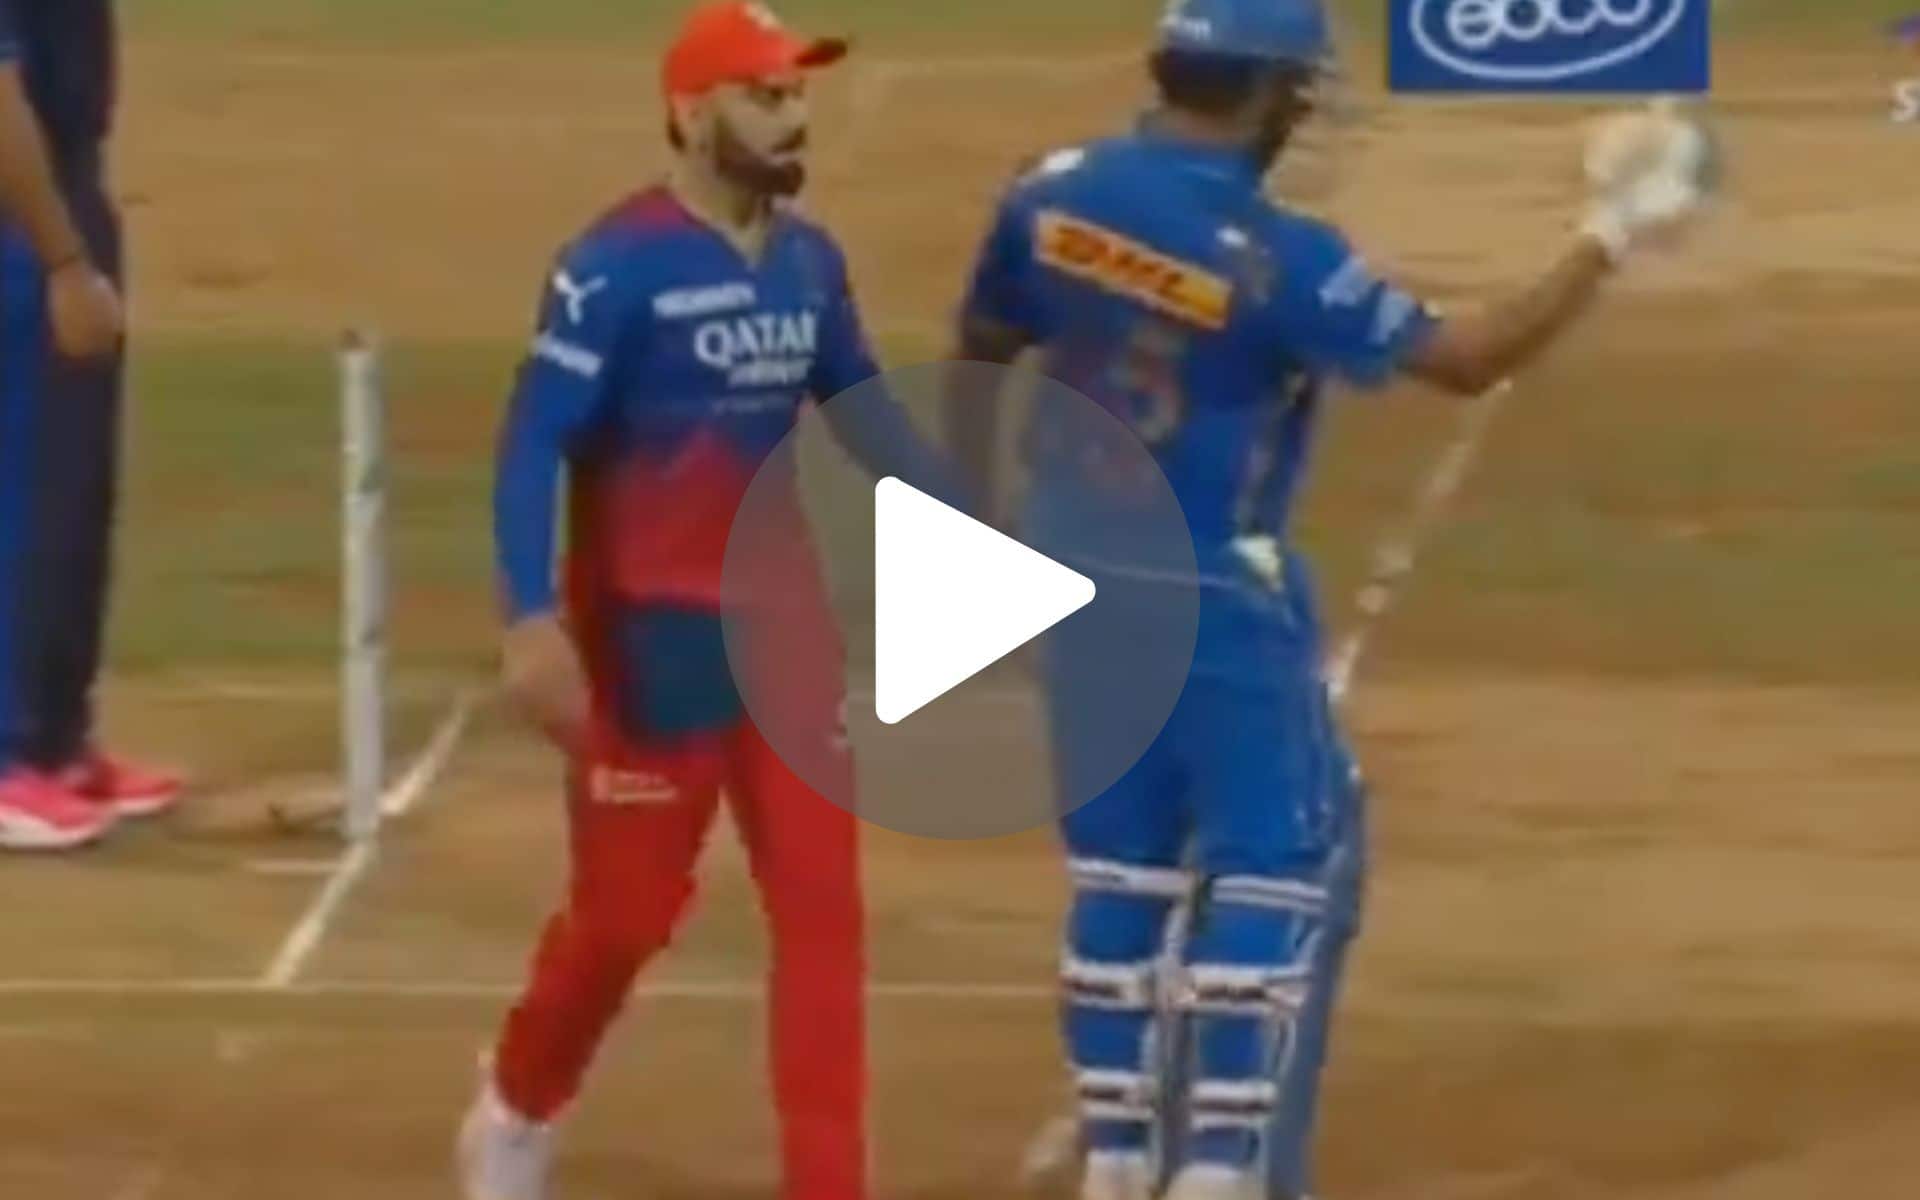 [Watch] Virat Kohli Pats Rohit Sharma's Backside As He Unleashes Hell For RCB At Wankhede